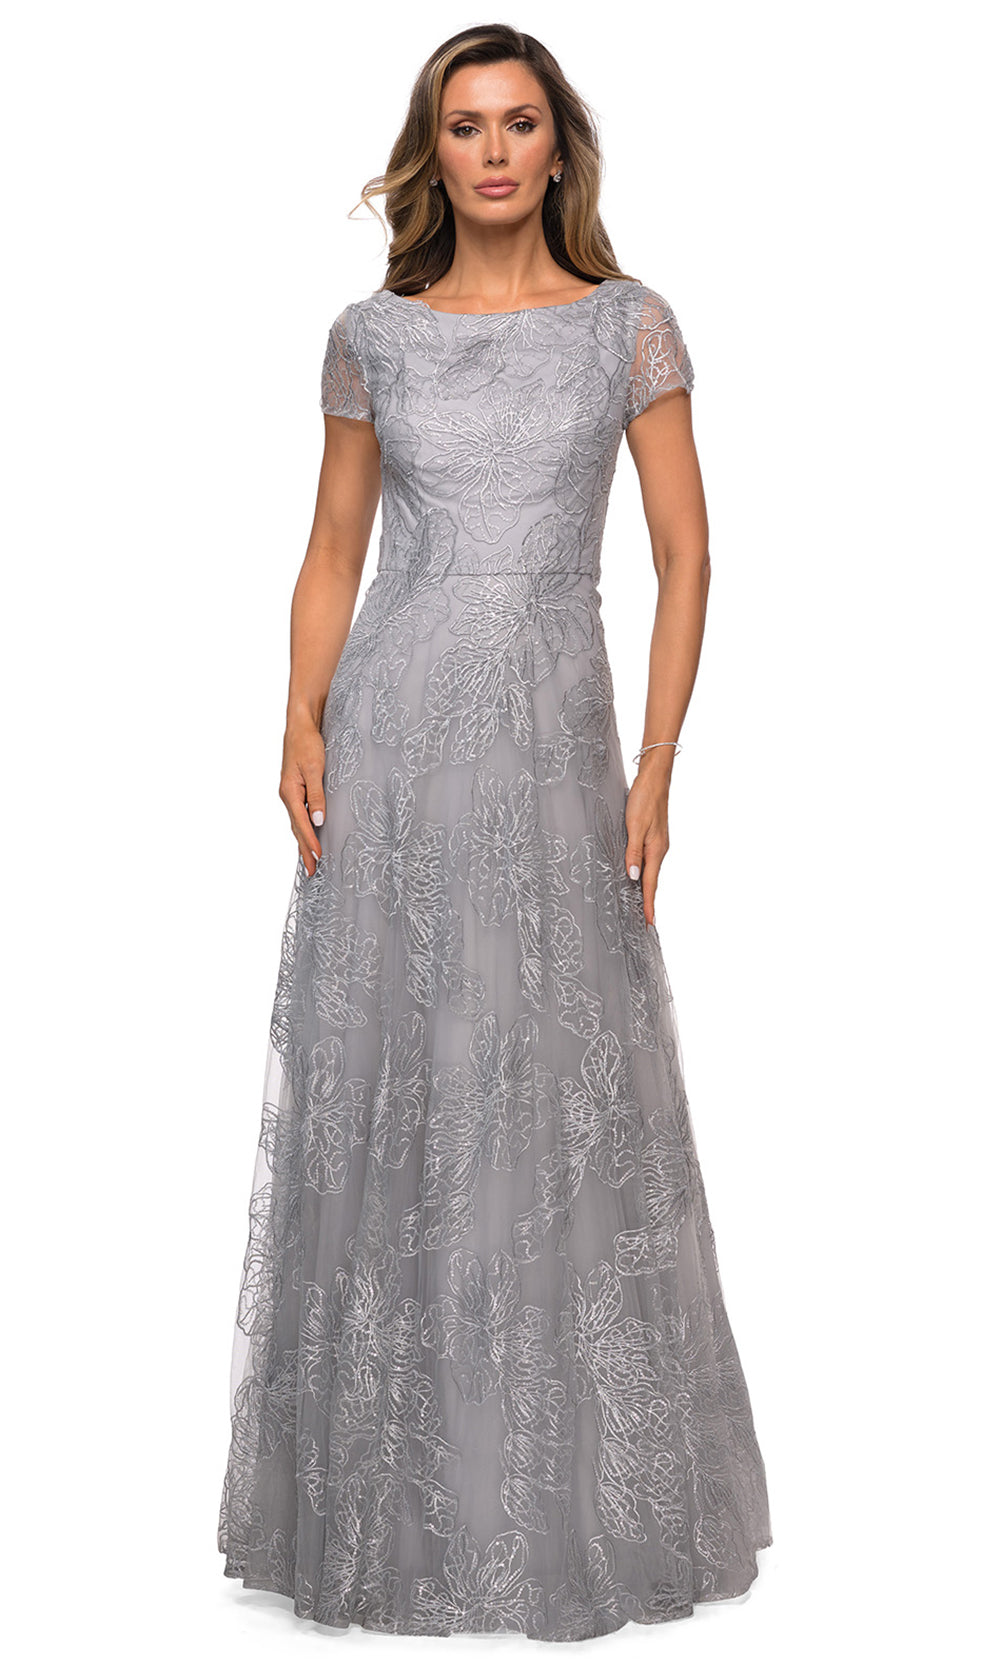 La Femme - 27837 Sequined Lace A-Line Gown In Silver